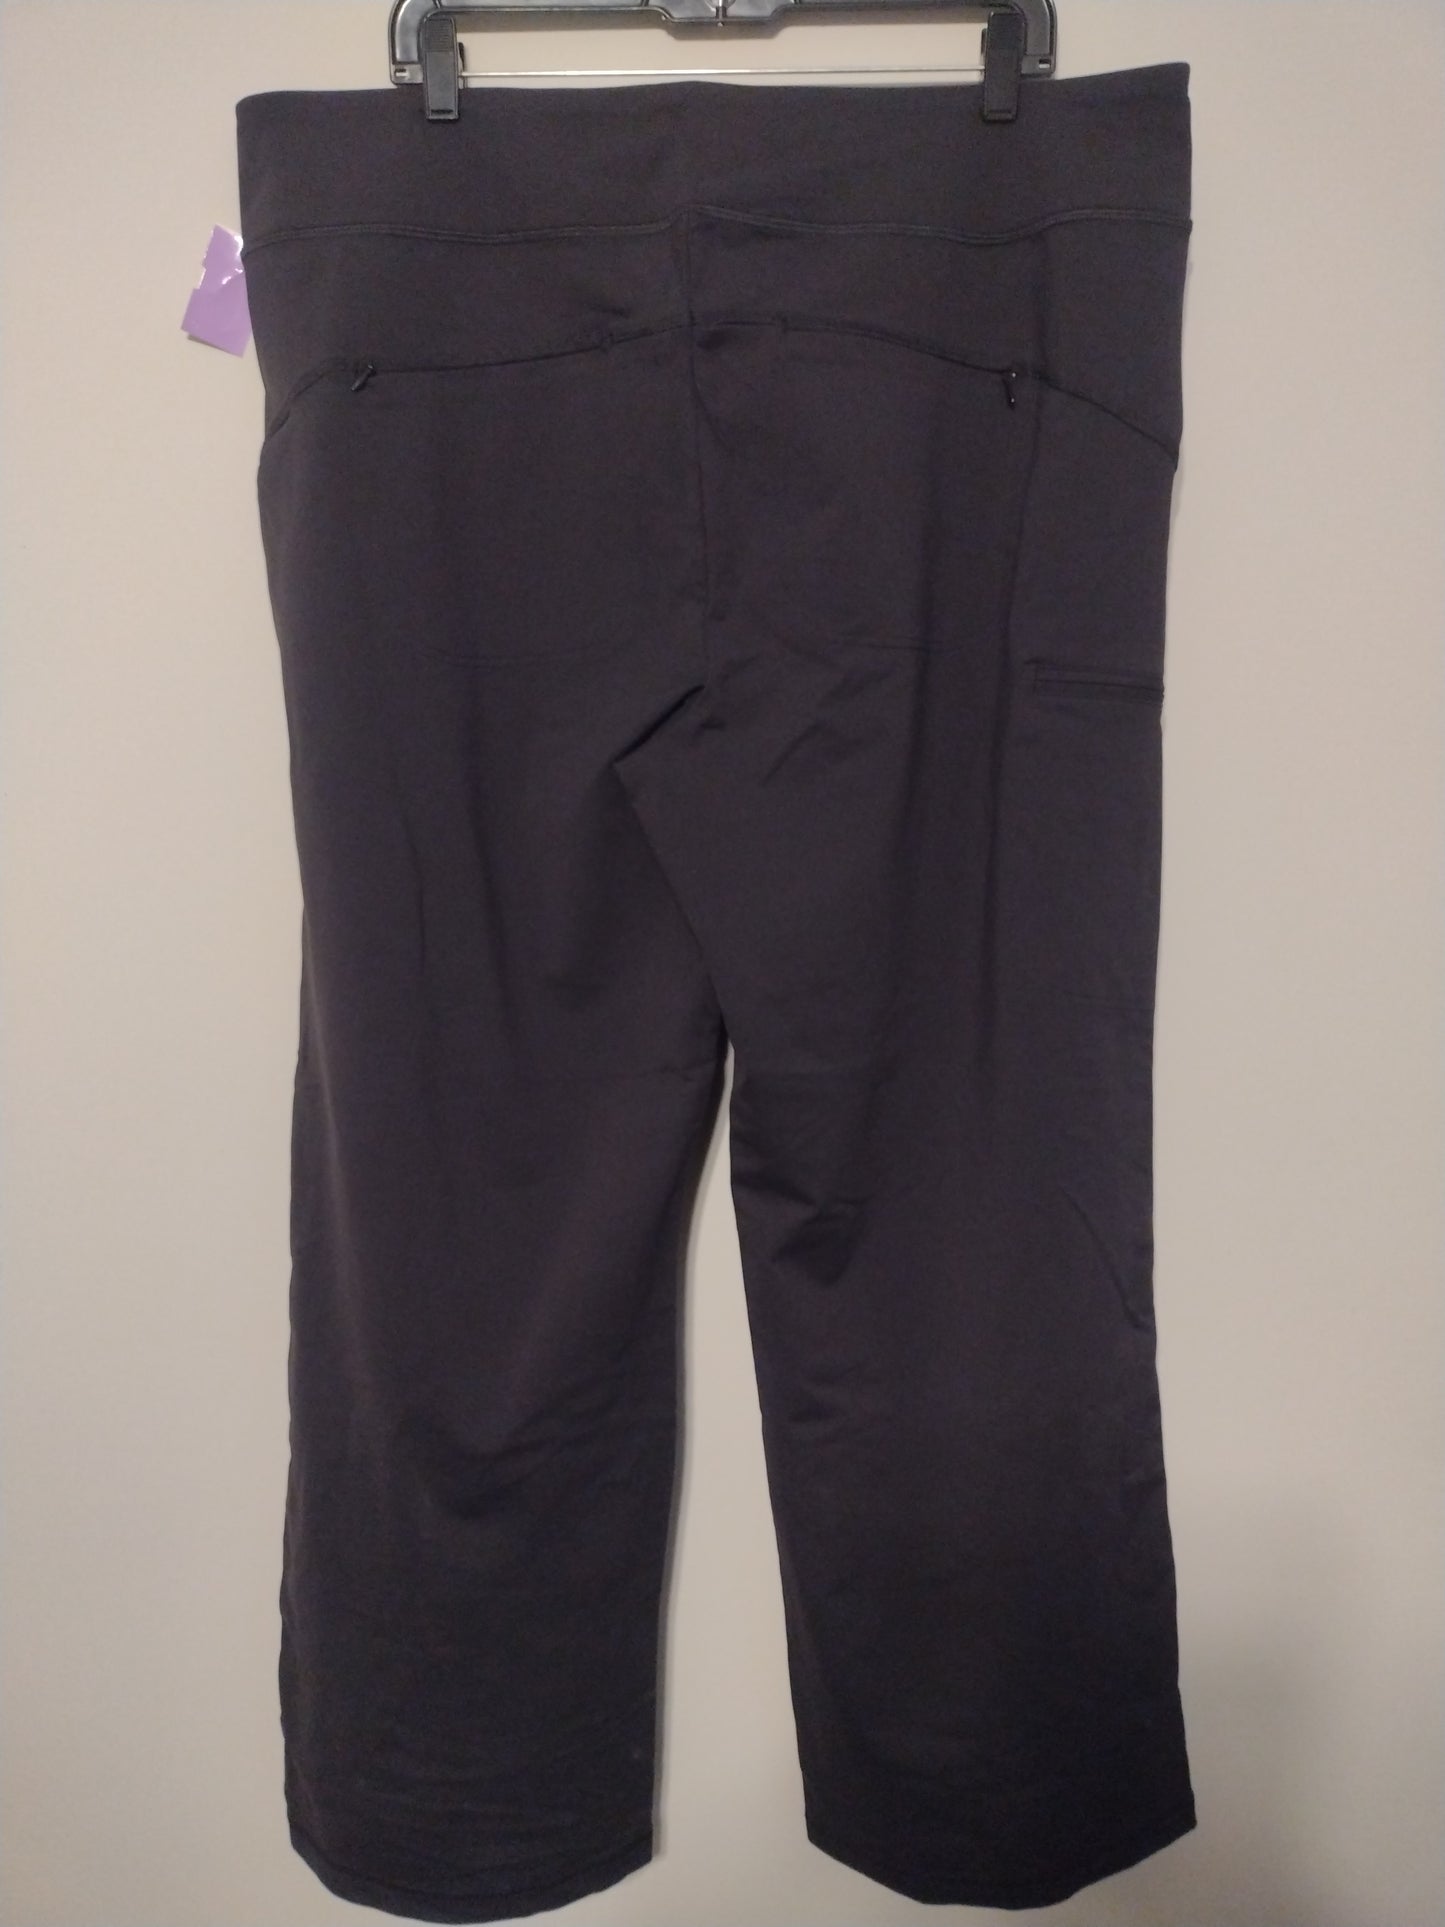 Athletic Pants By Duluth Trading  Size: 2x